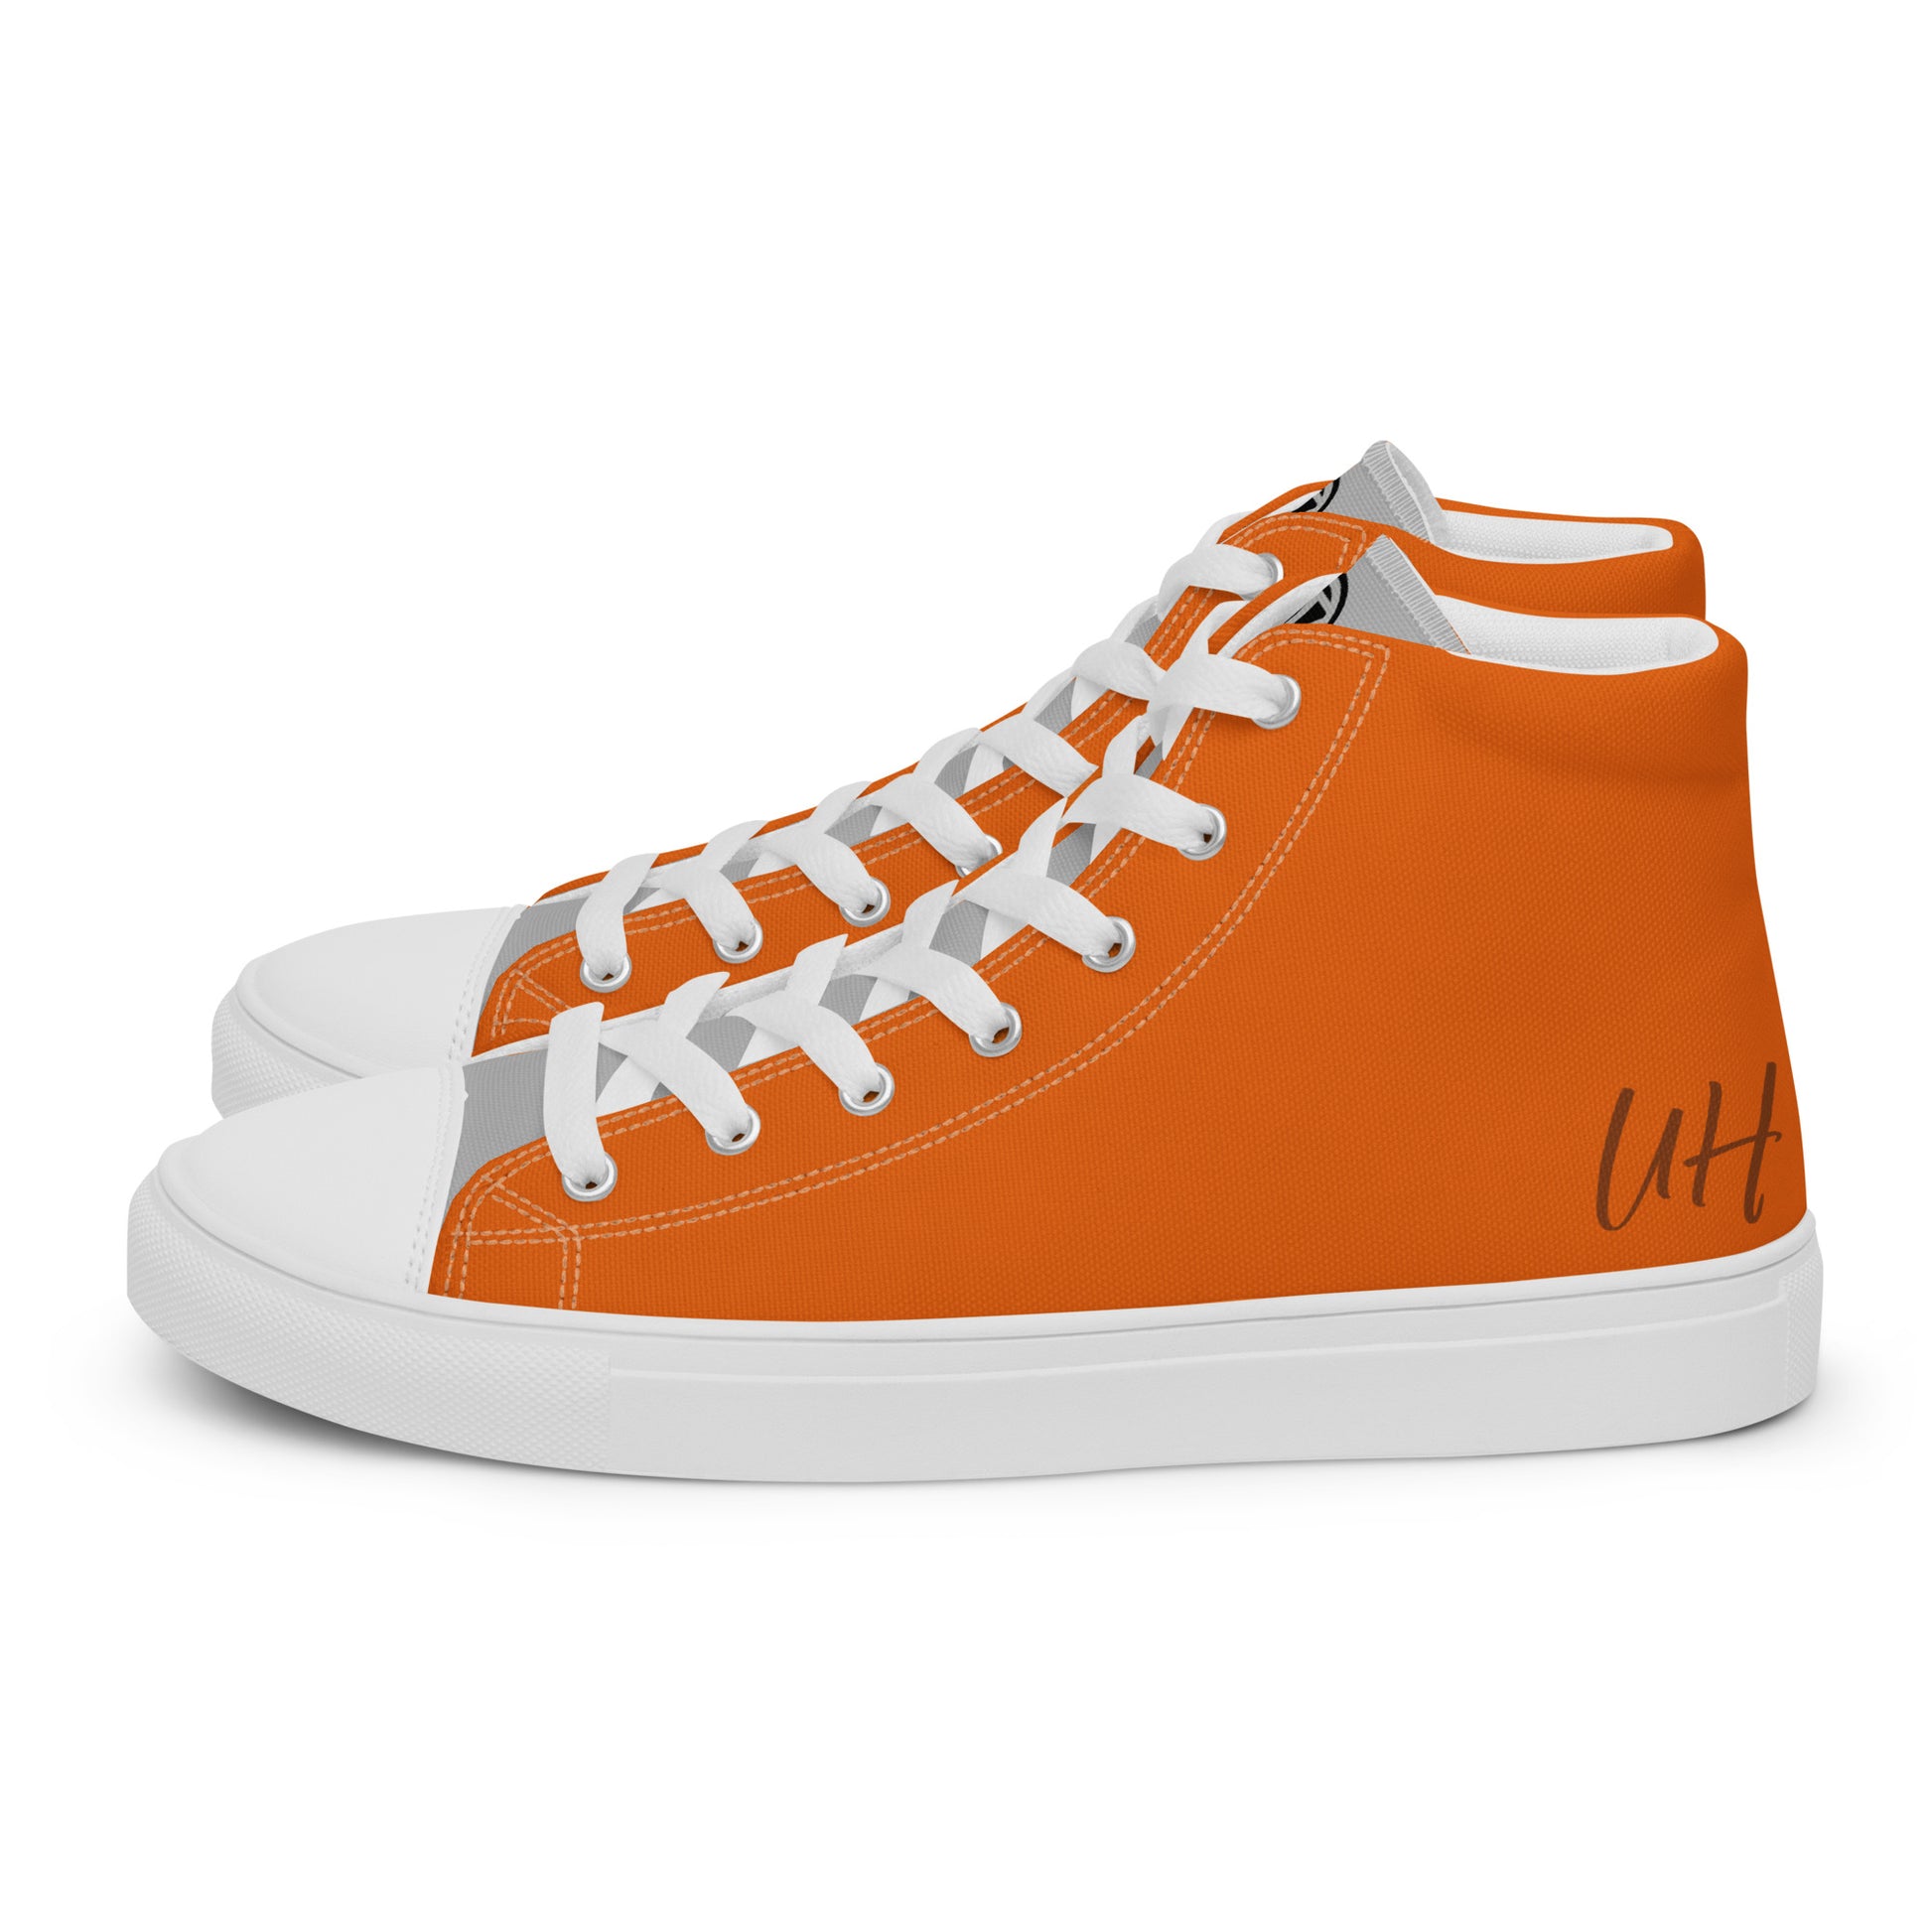 TIME OF VIBES - Women’s High Sneaker MyVIBES + Initials - €189.00